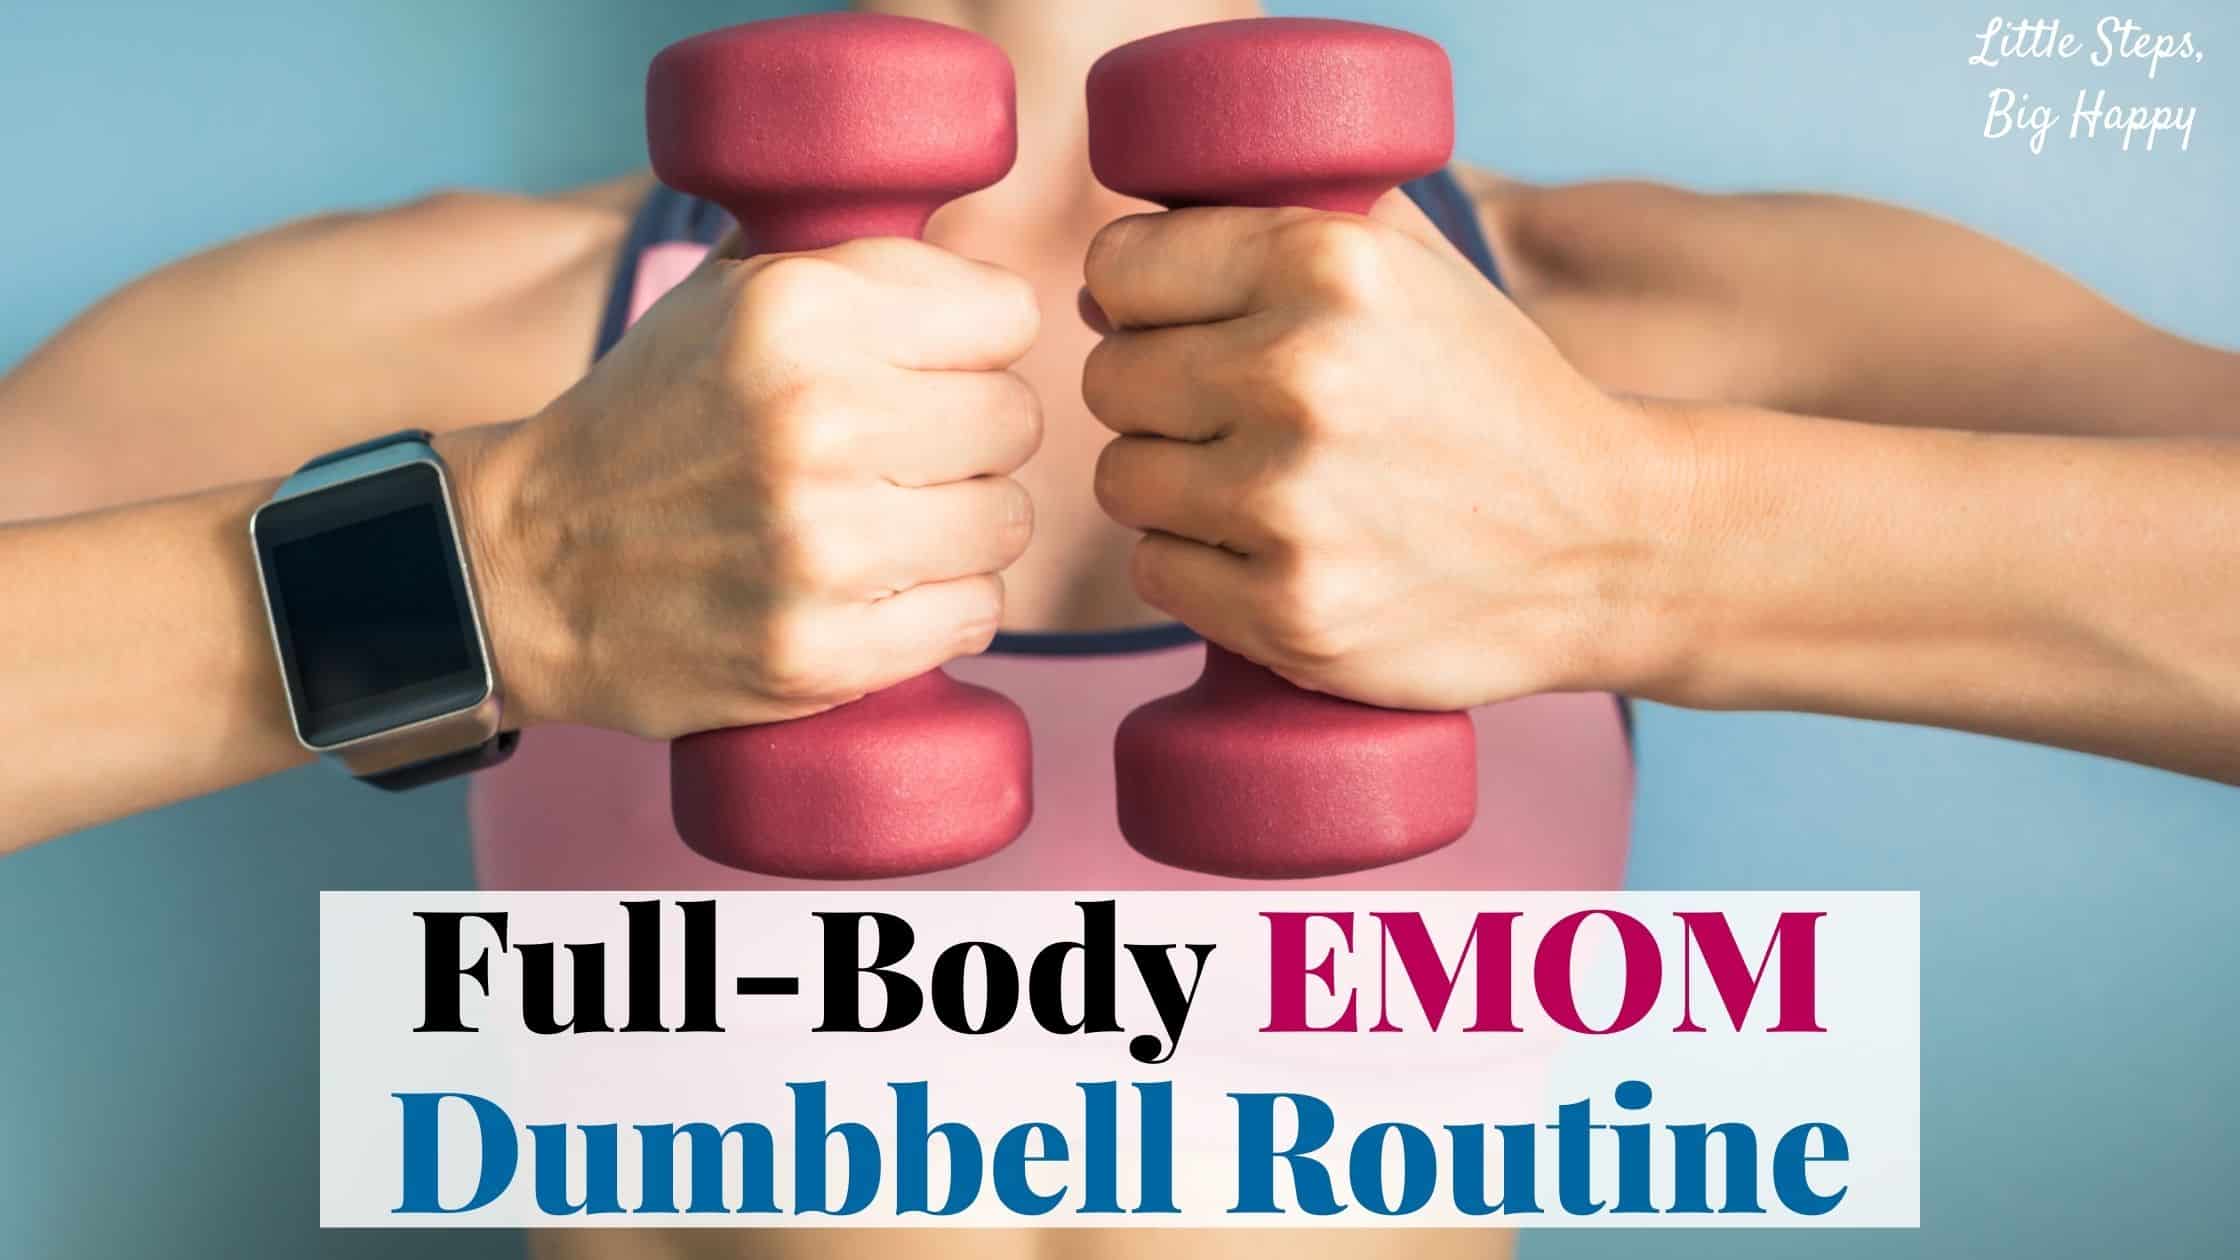 Need Some EMOM Workout Ideas? Try this EMOM Dumbbell Routine